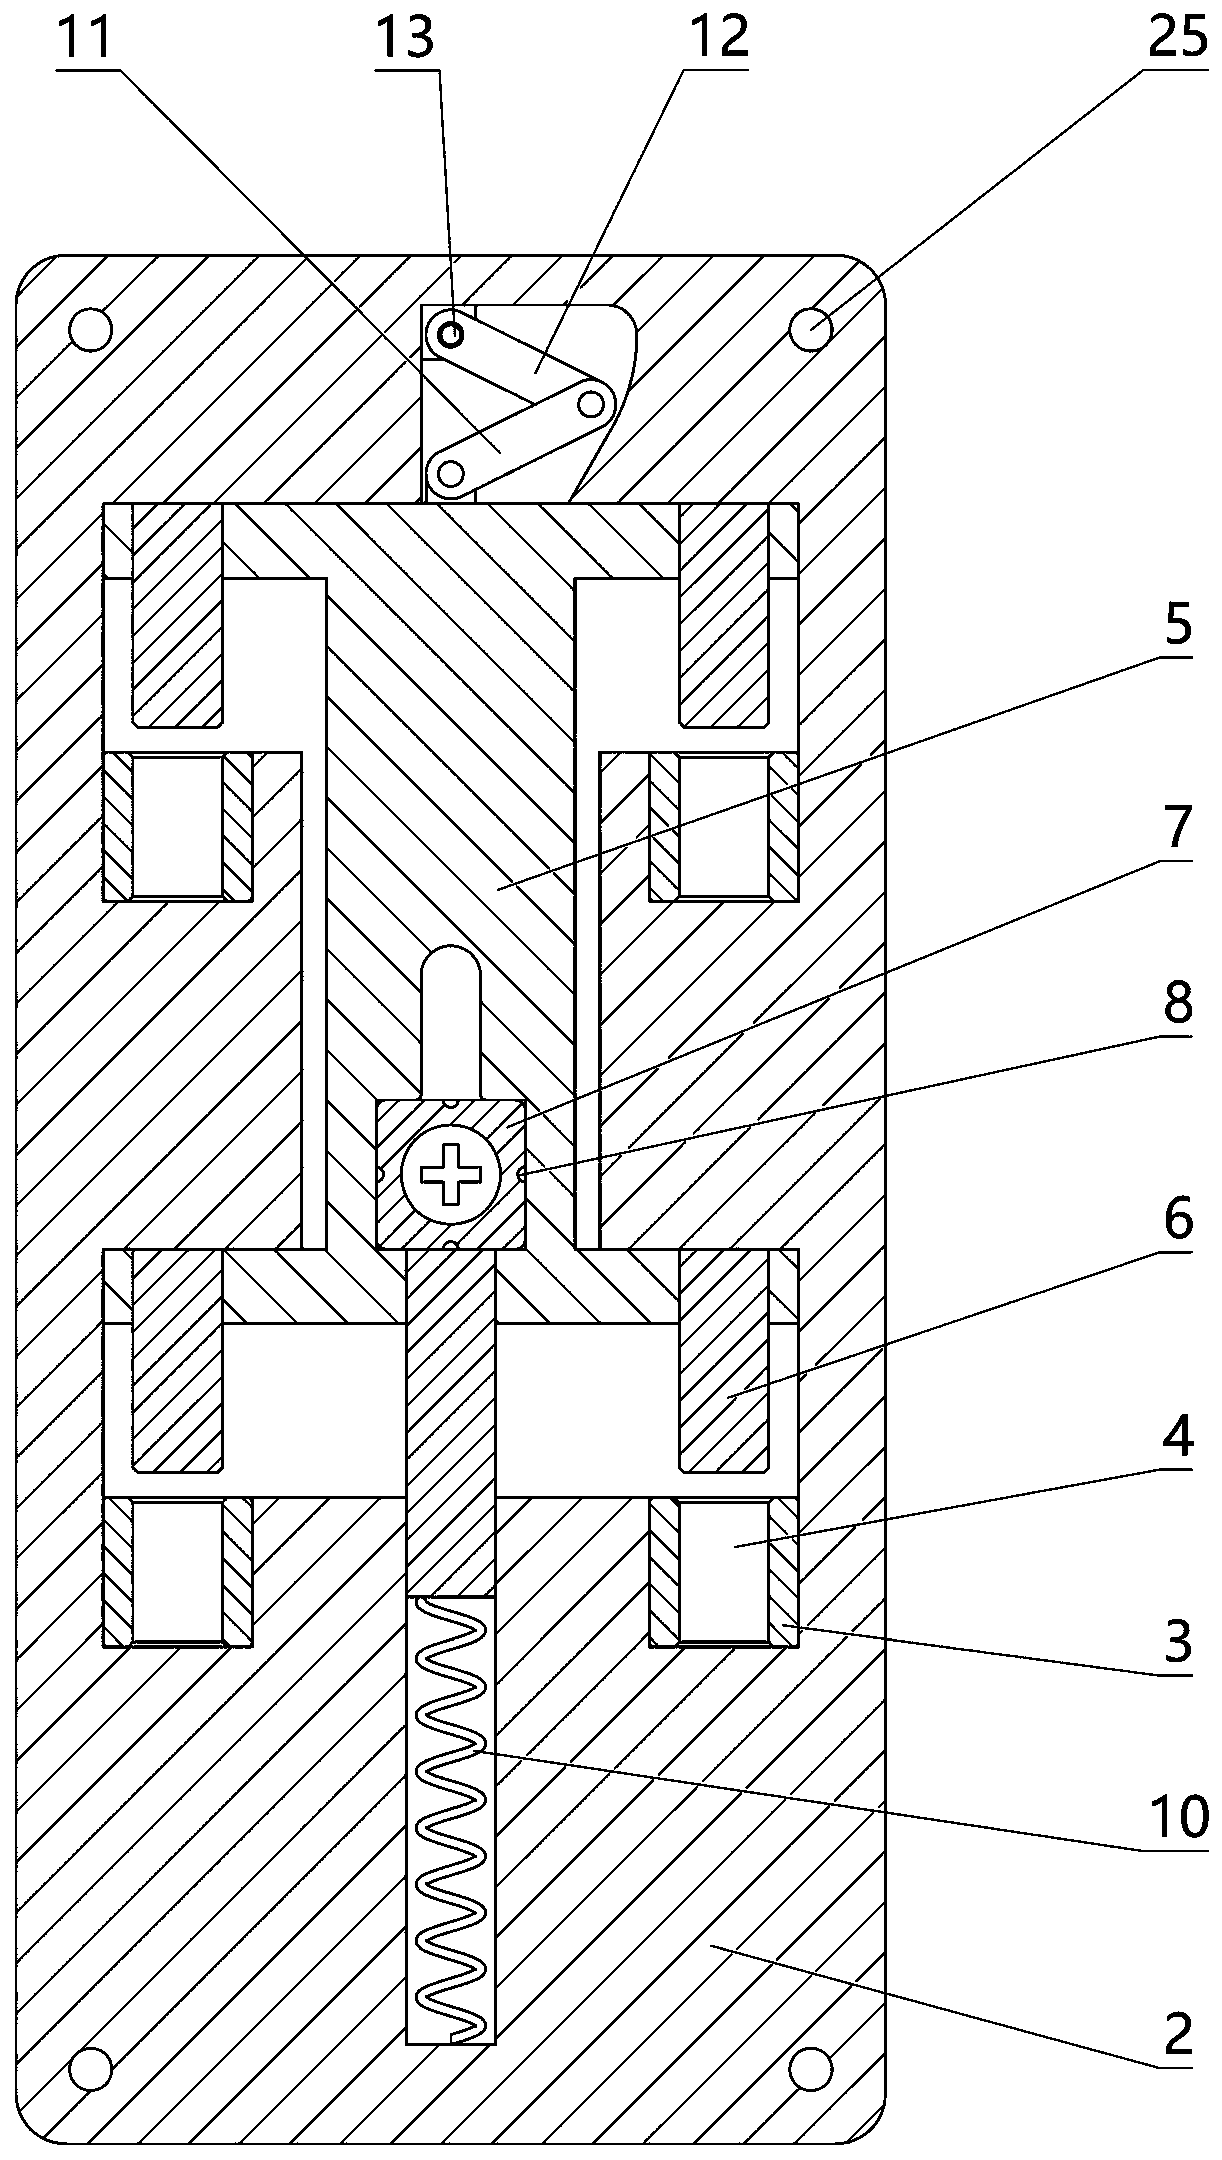 An anti-disassembly hinge and a method for preventing disassembly of the hinge